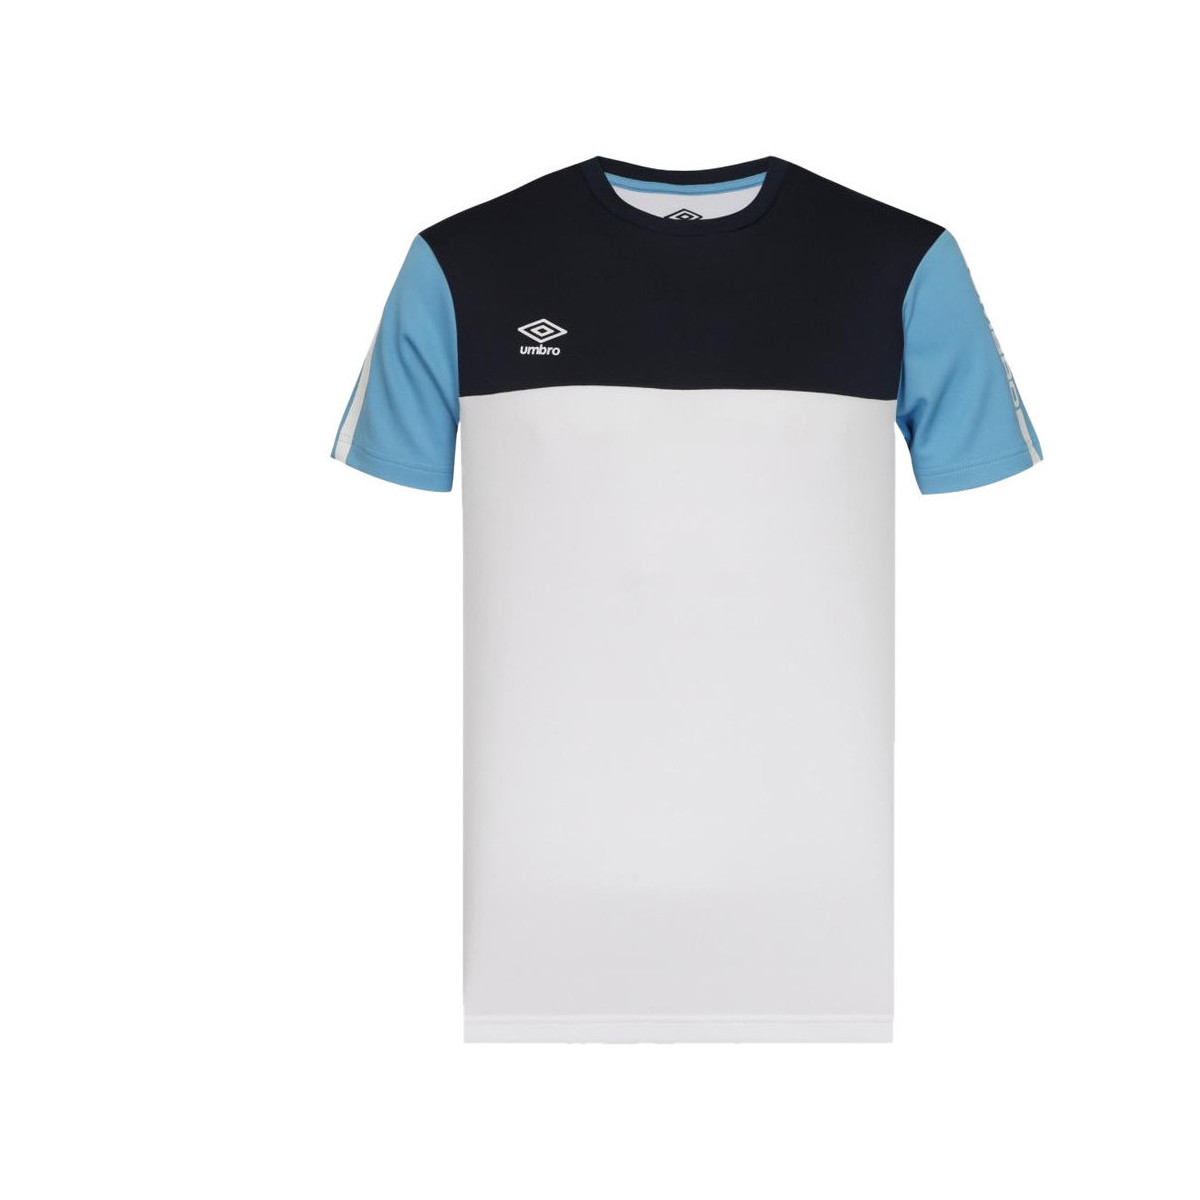 Textiel Heren T-shirts & Polo’s Umbro  Wit